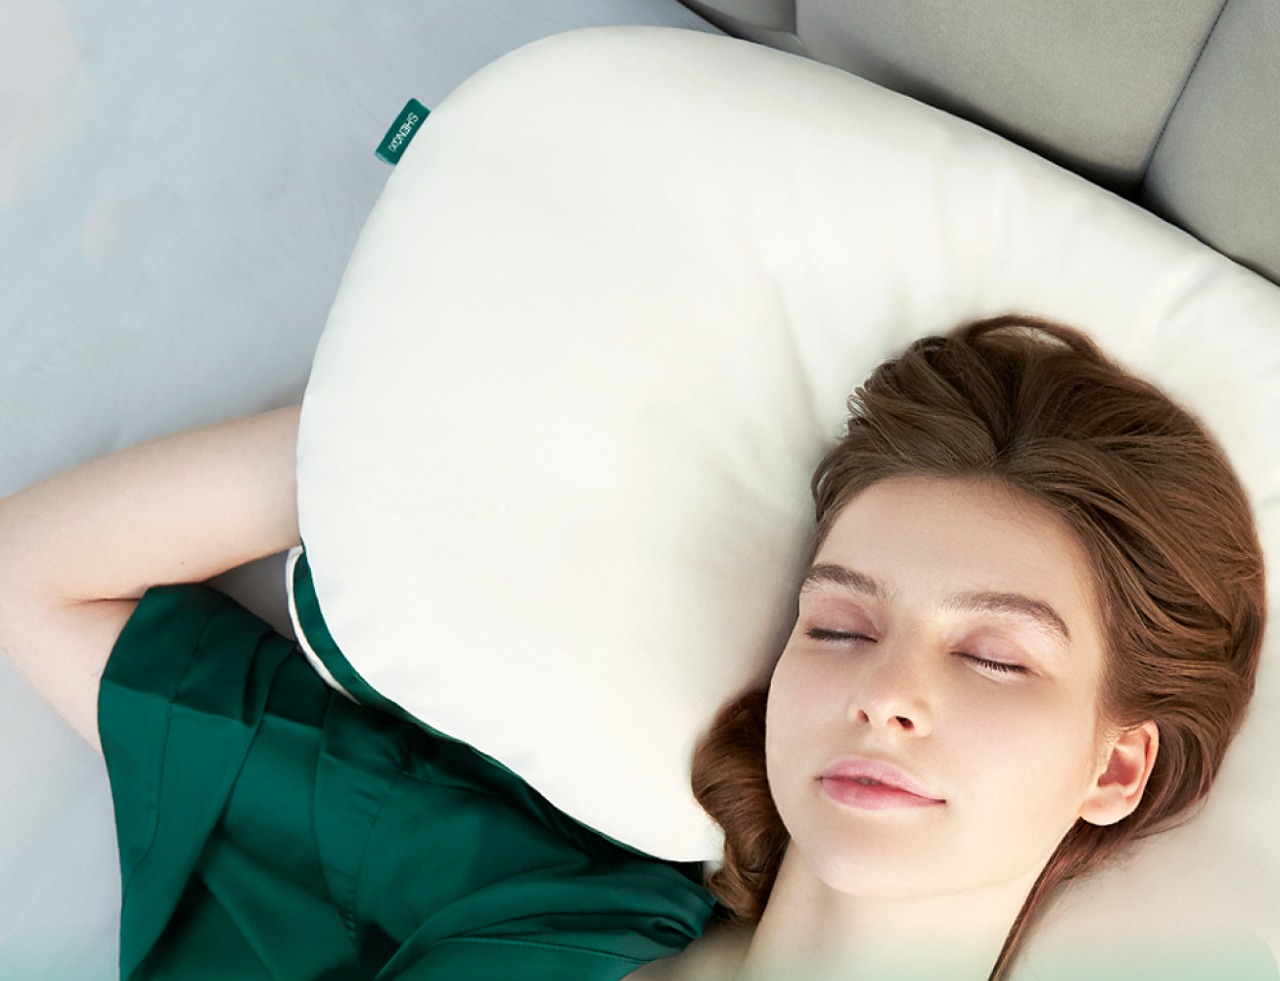 Multi-layer modular supportive pillow also comes with a pocket to tuck your hands into while sleeping